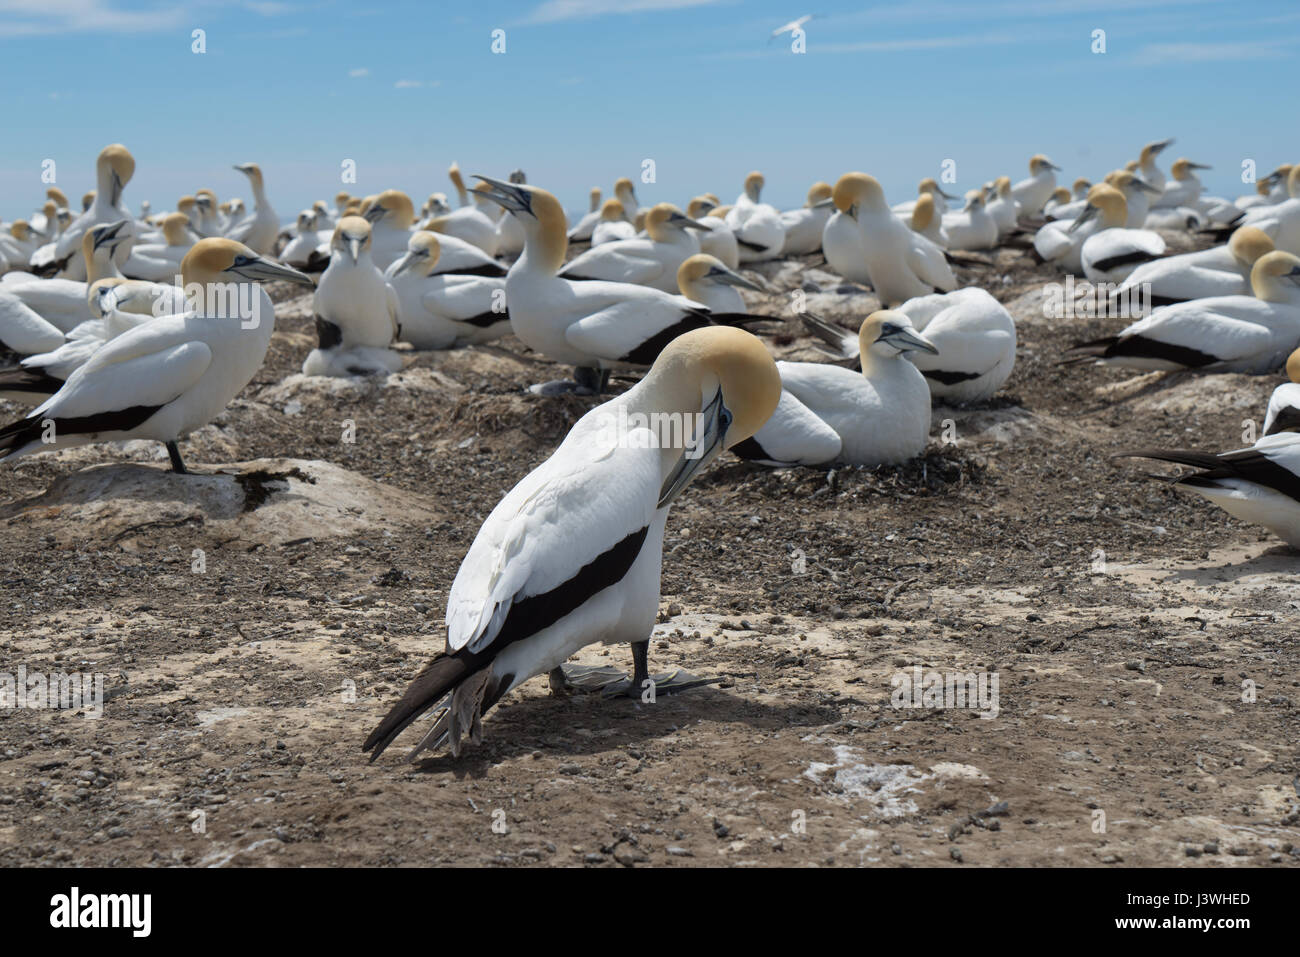 Gannetts colony during breeding season at Cape Kidnappers, Hawke's Bay, New Zealand. Stock Photo